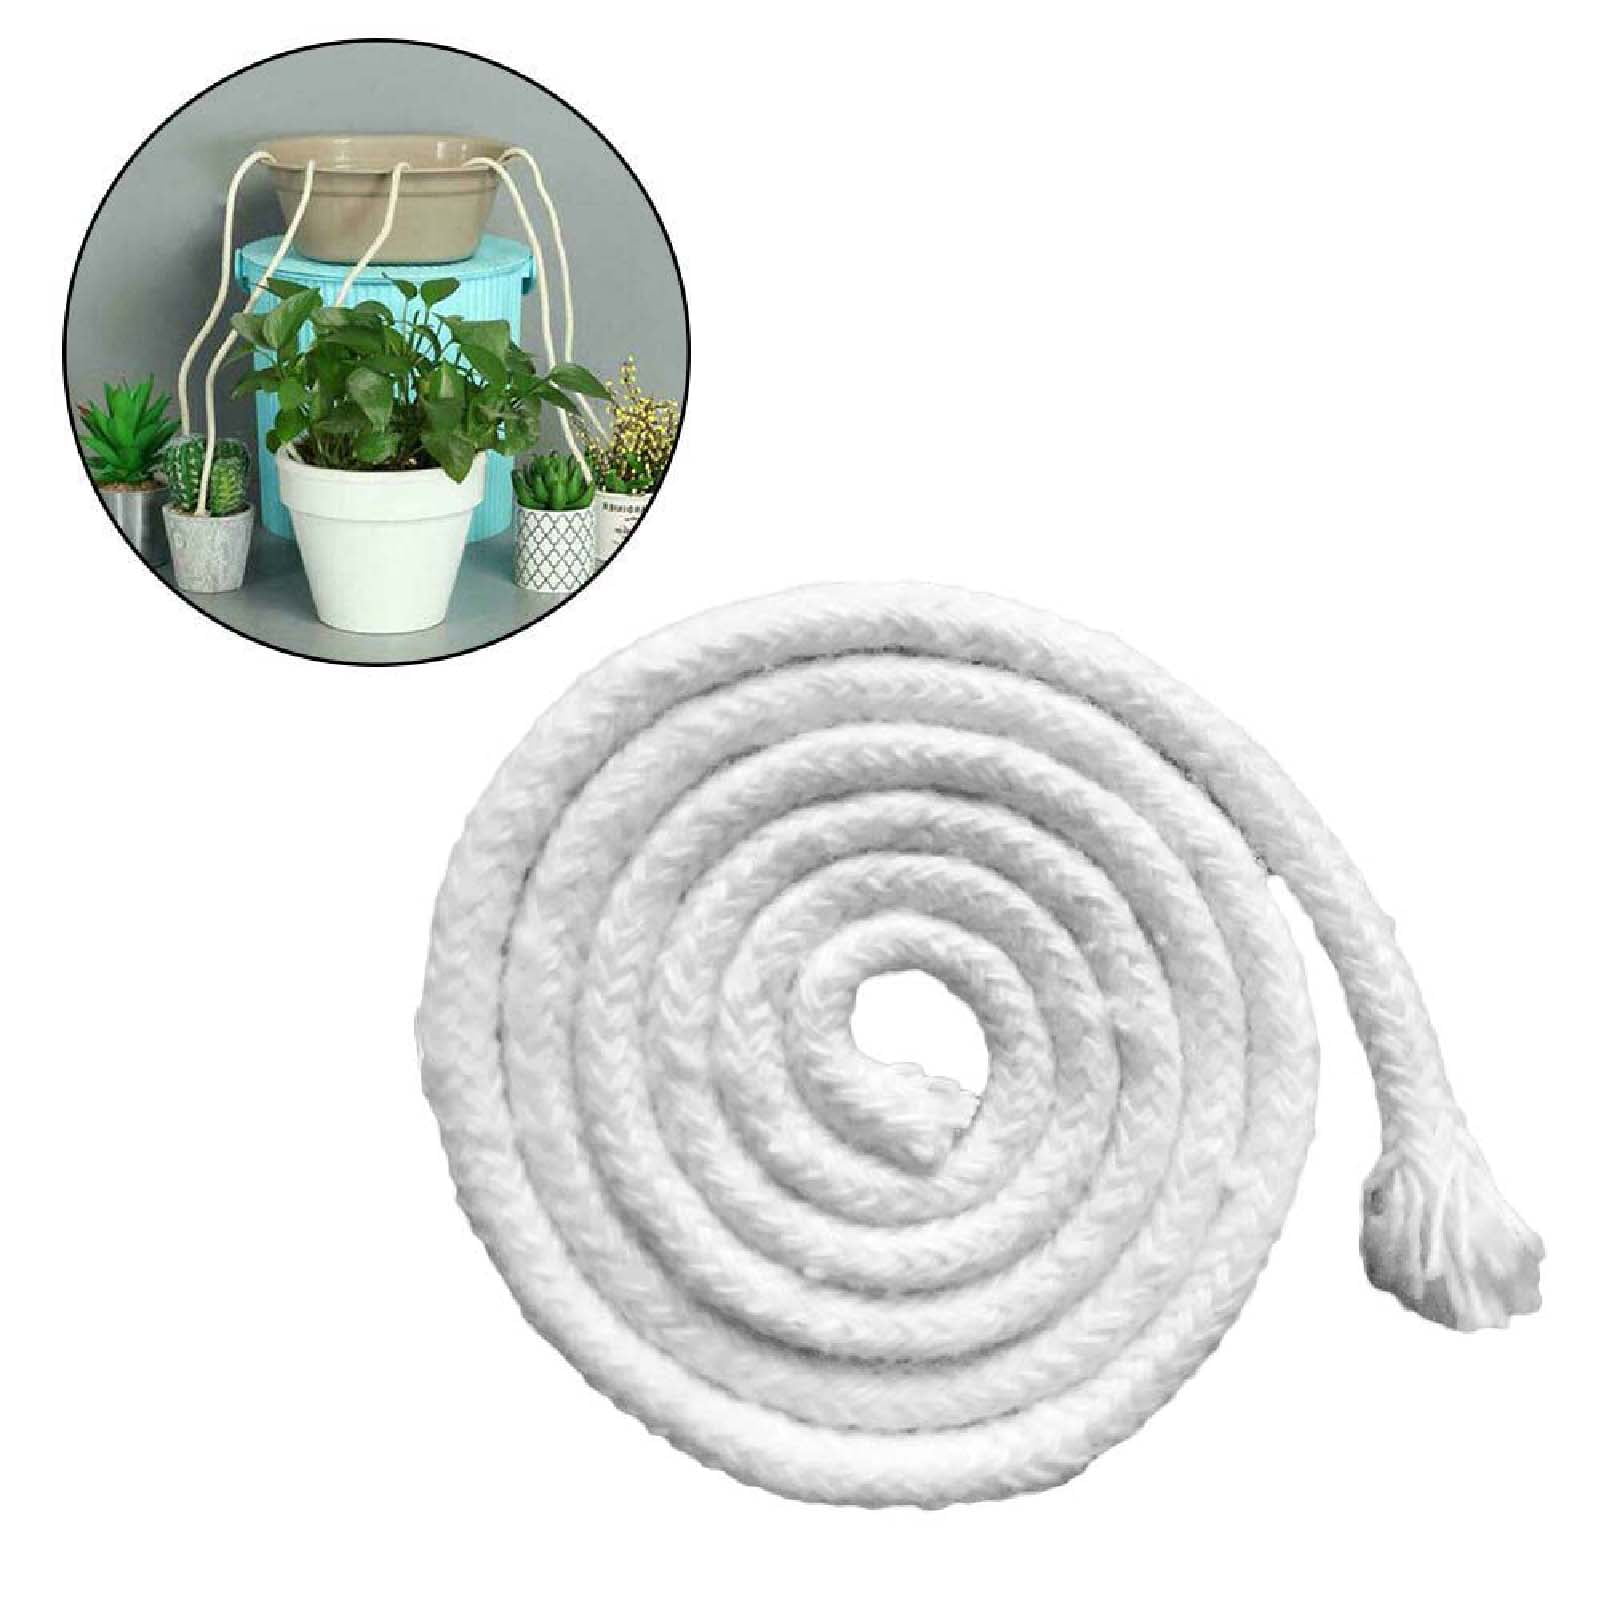 ORIMERC 30 Feet Self Watering Capillary Wick Cord Vacation Plant Sitter DIY Self-Watering Planter Pot Automatic Water Wicking Hydroponic System Device Potted African Violet Auto Seedling Waterer Rope 